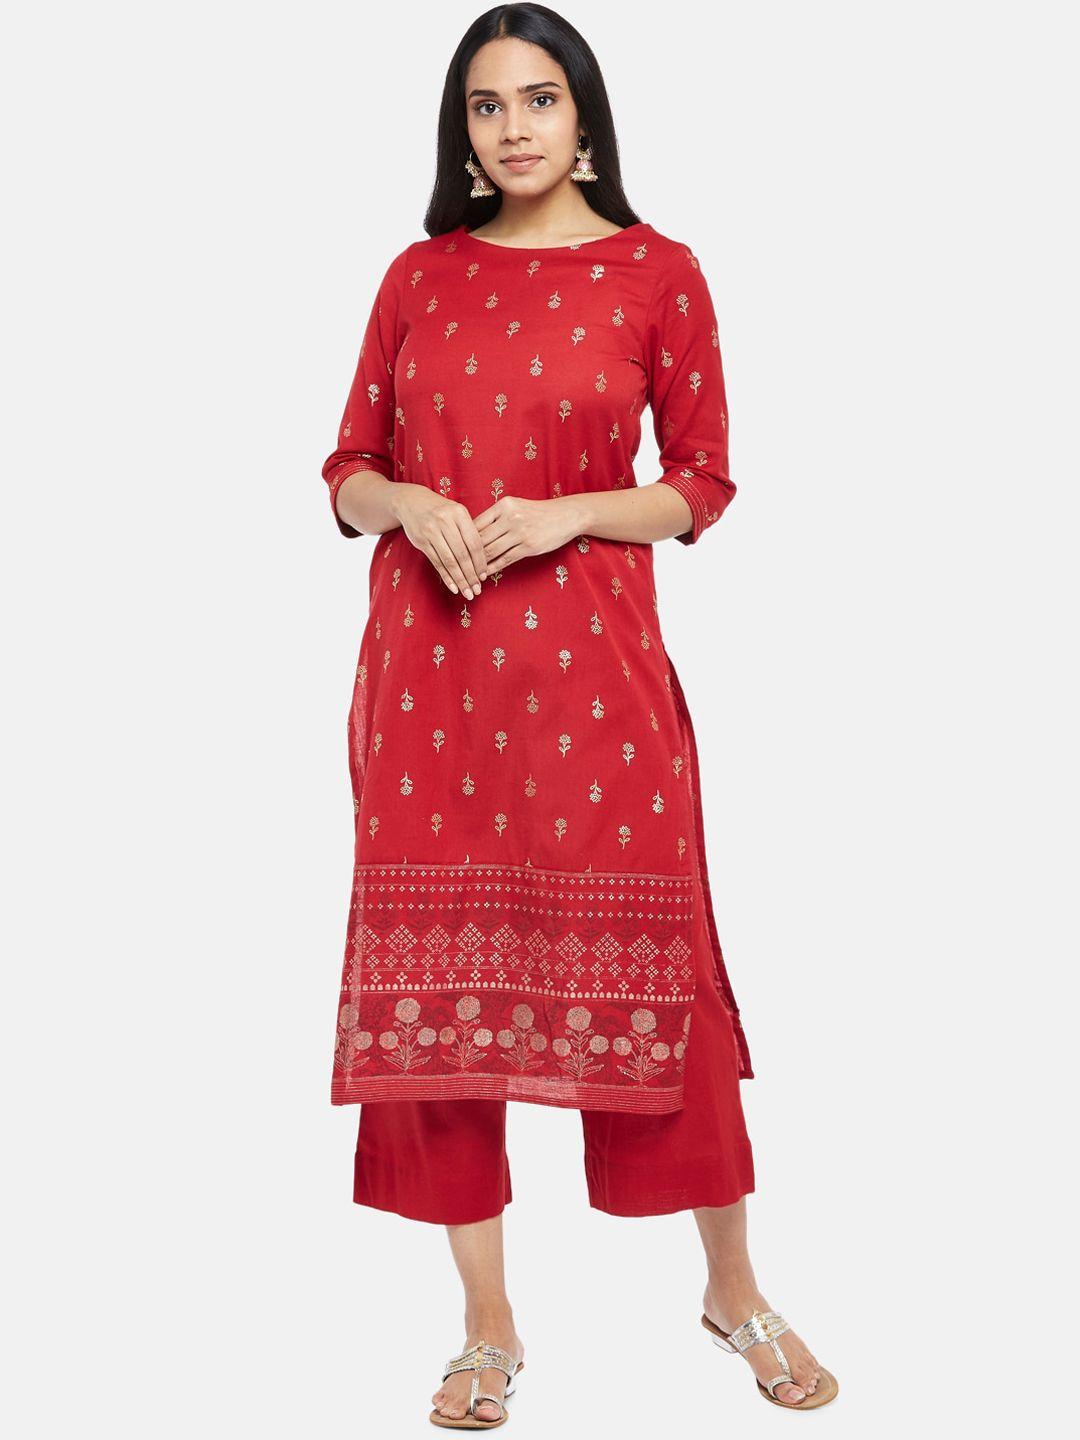 rangmanch-by-pantaloons-women-red-floral-printed-pure-cotton-kurta-with-palazzos